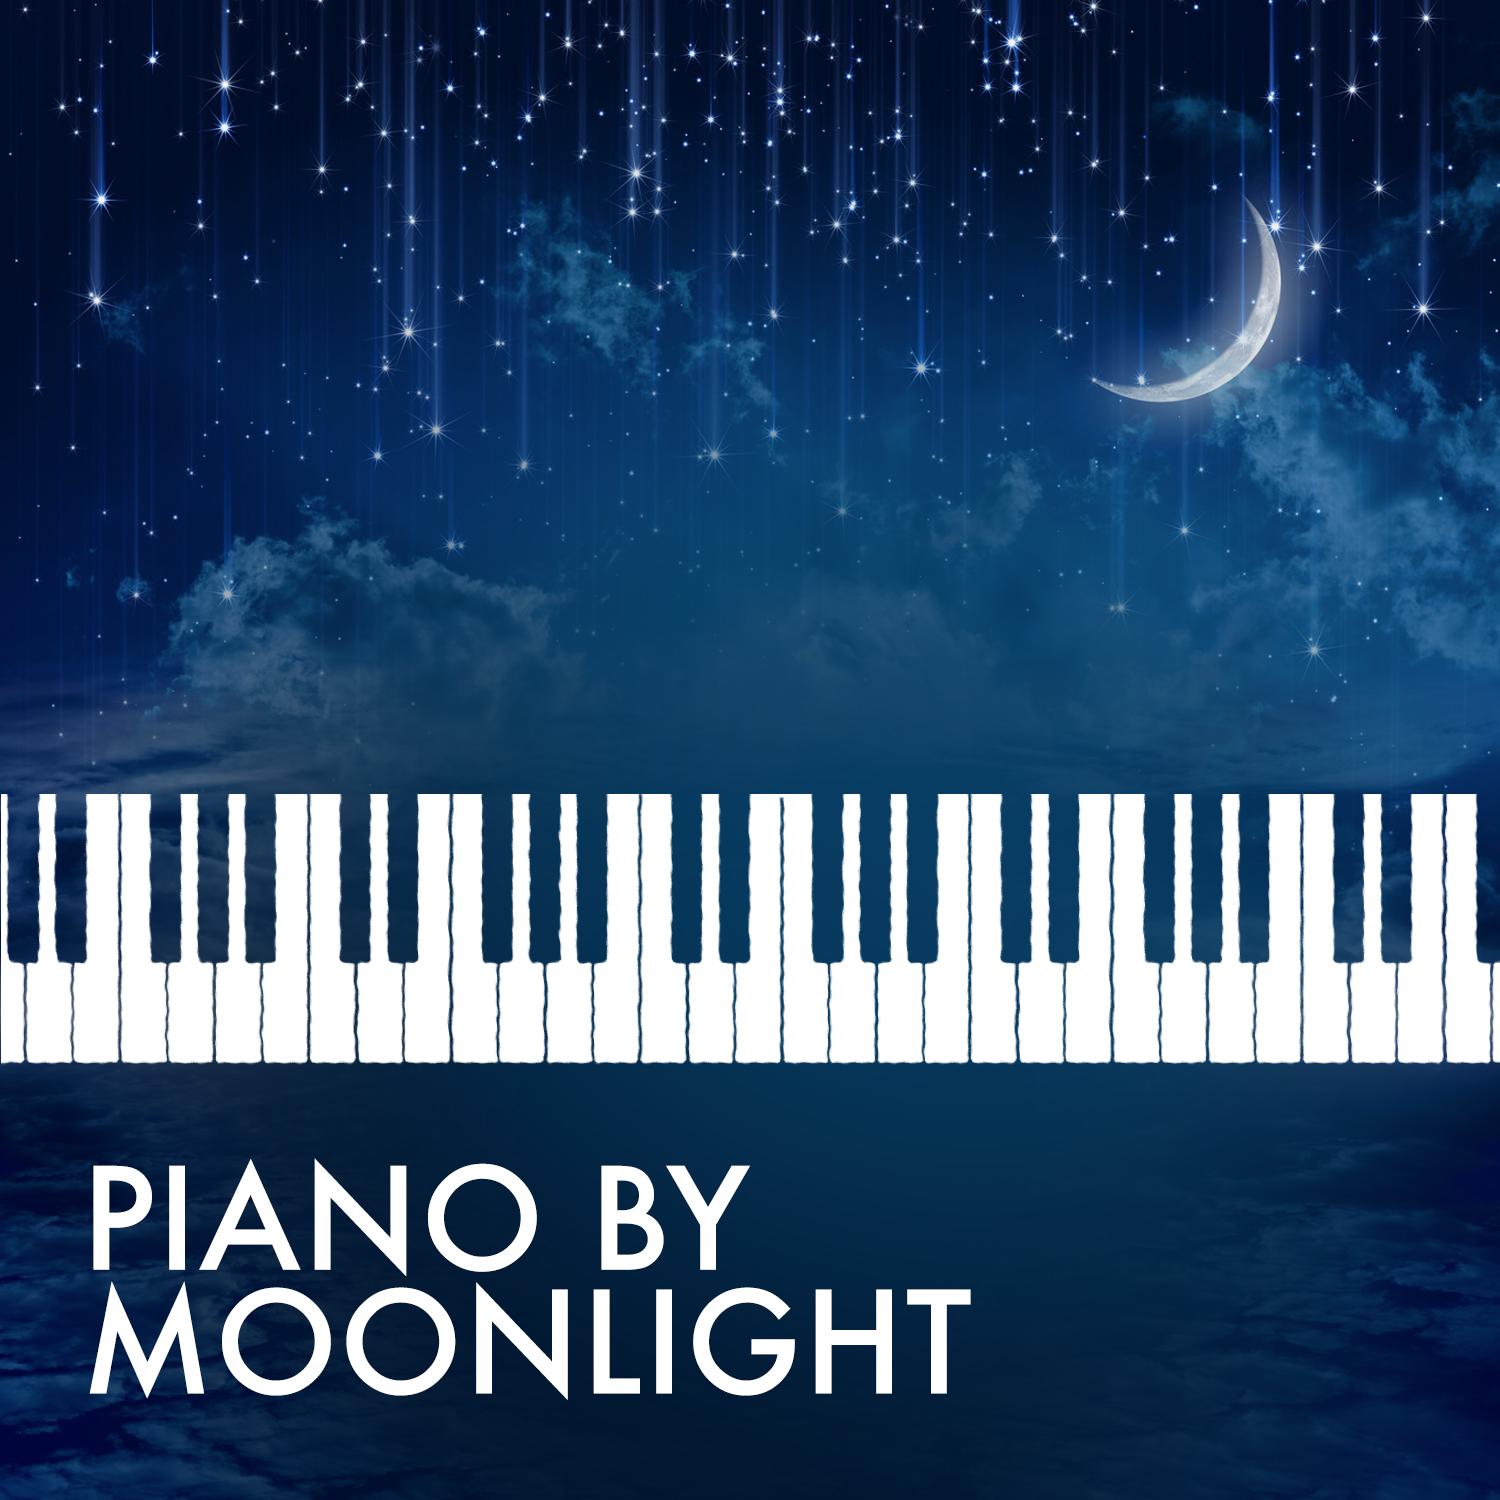 Piano by Moonlight